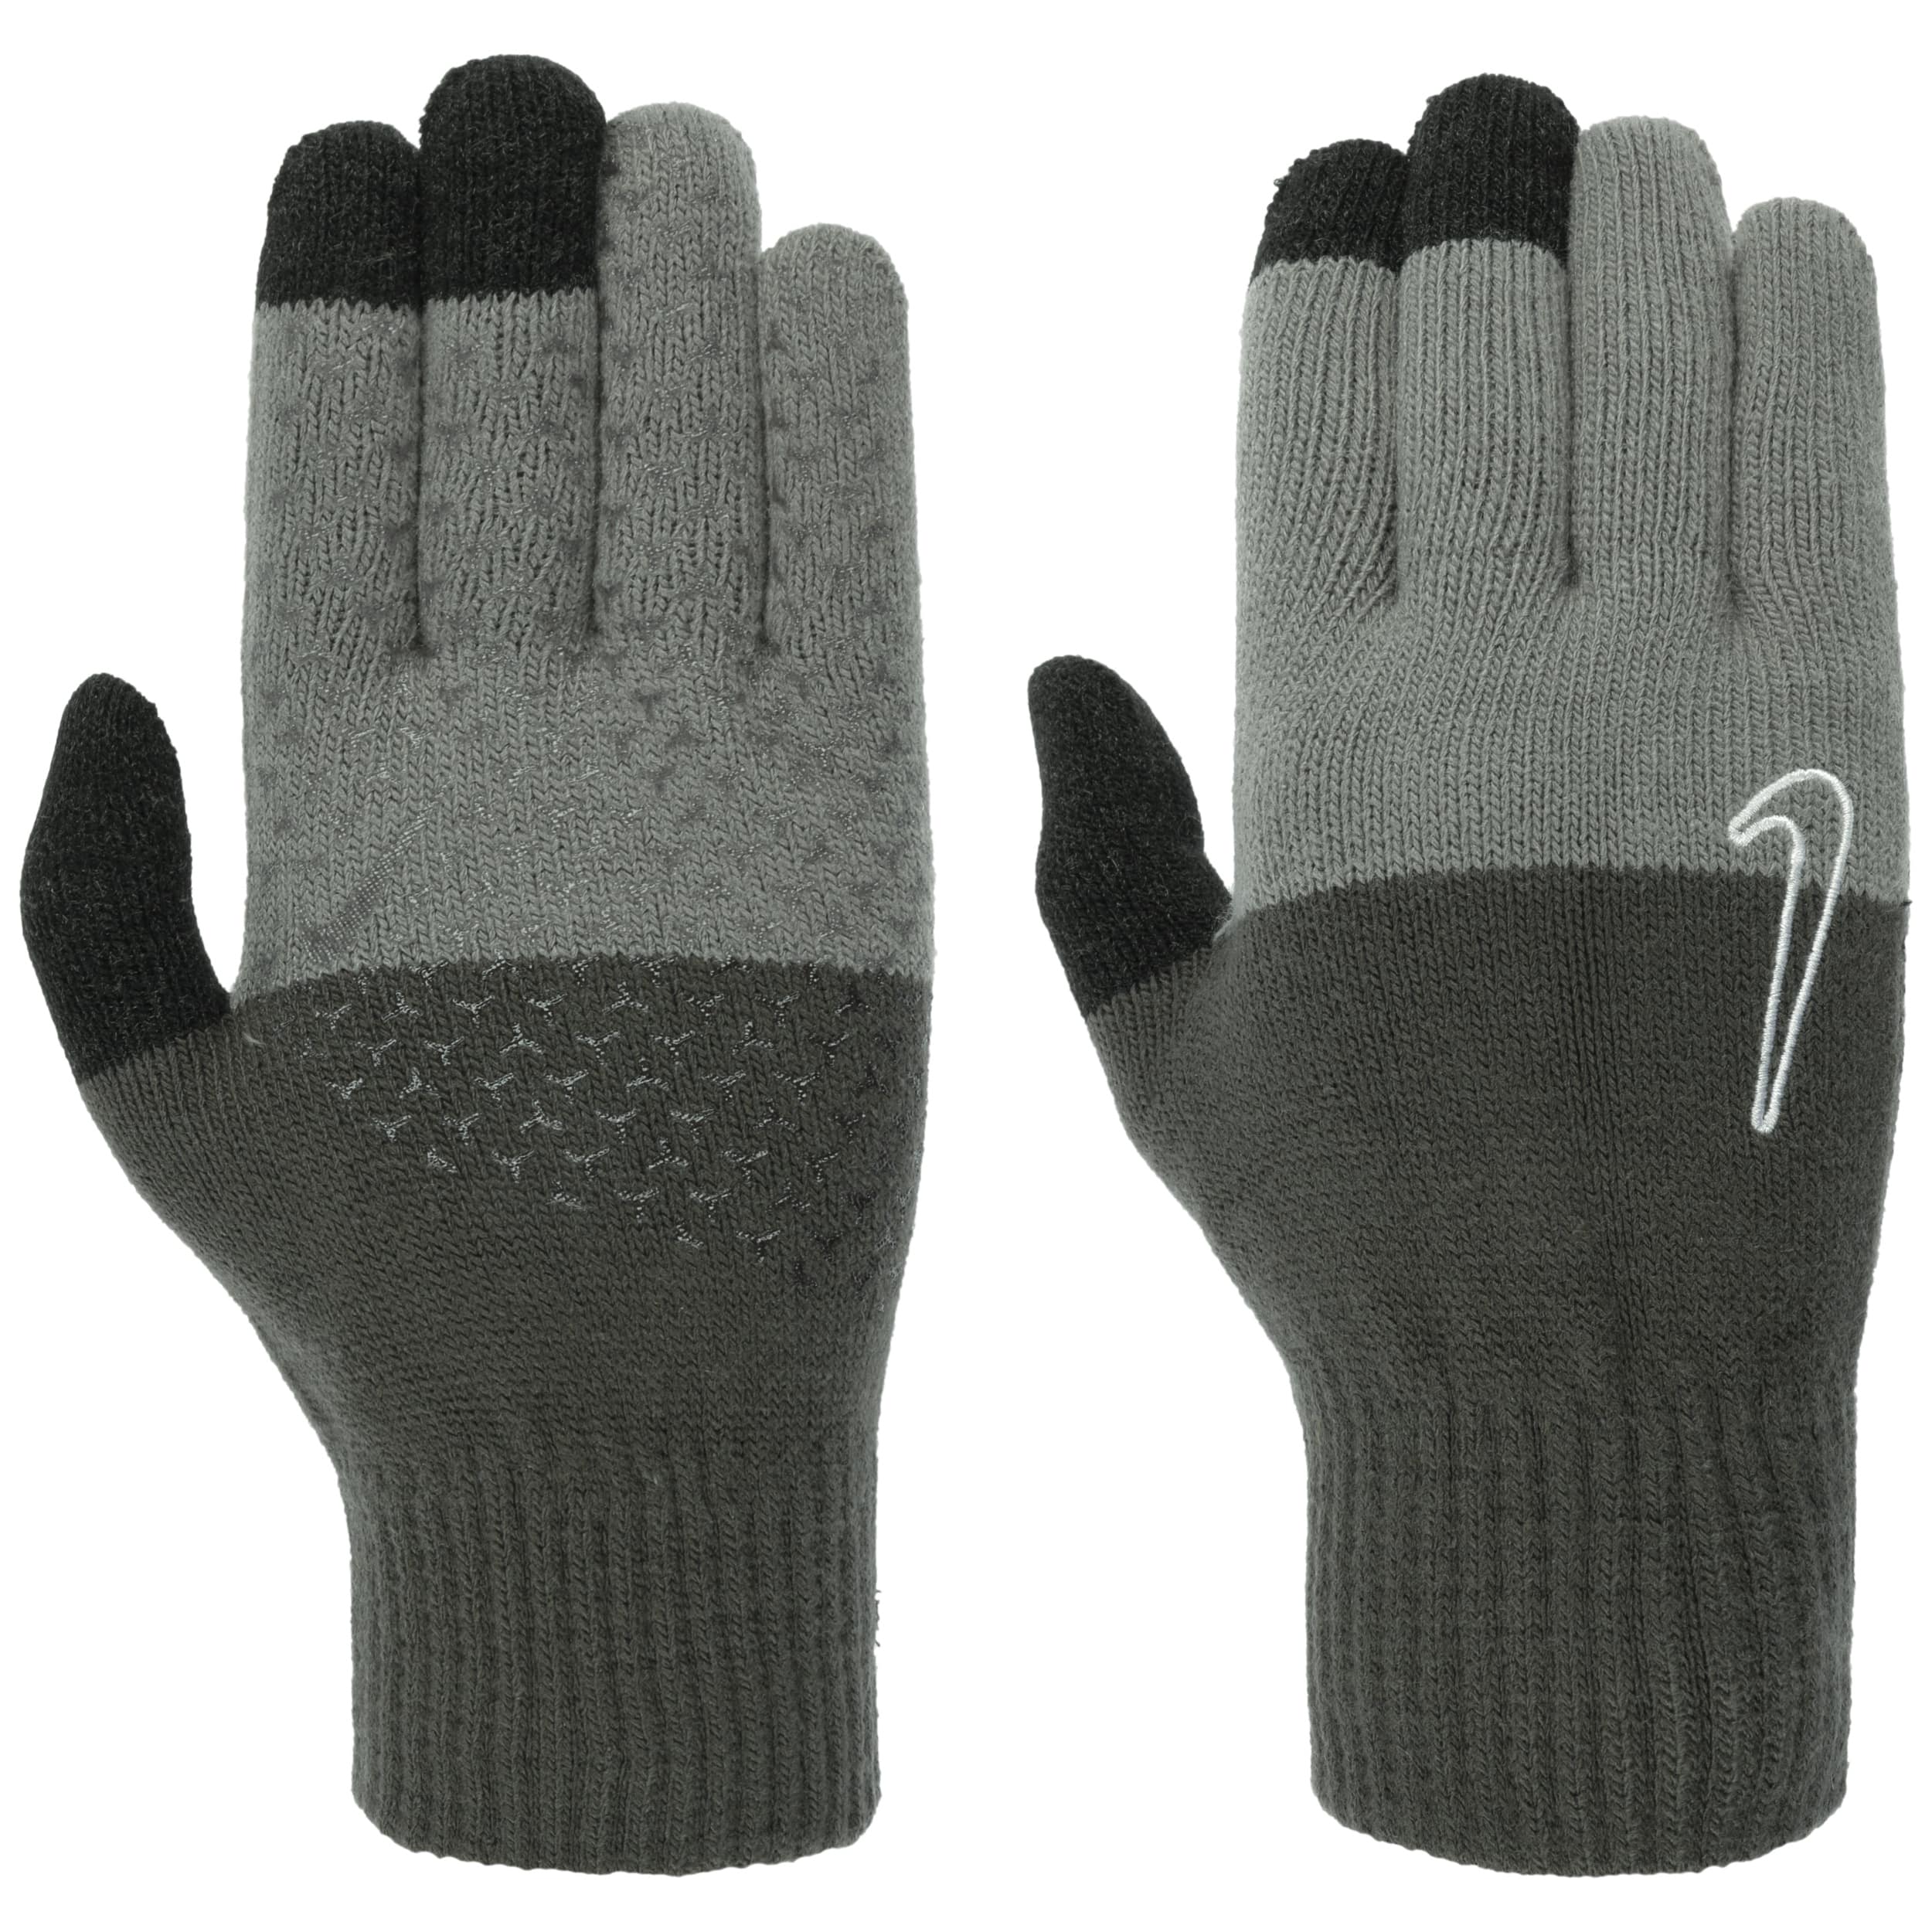 by - TG Knit Nike € 2.0 Handschuhe 25,95 Grip Tech Graphic